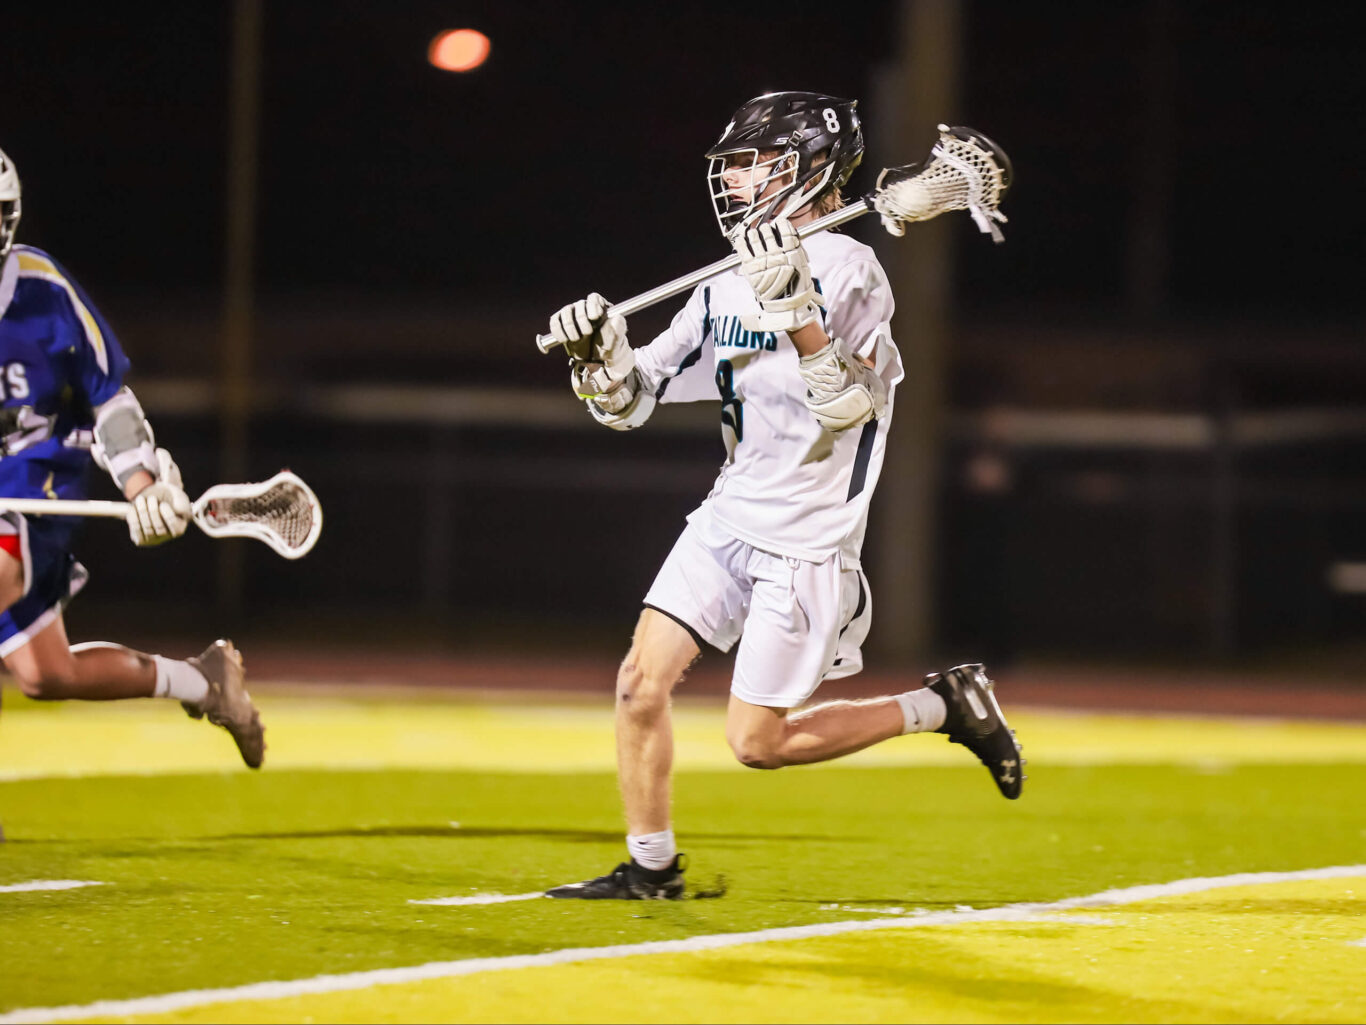 A boys' lacrosse player is running on the field at night.